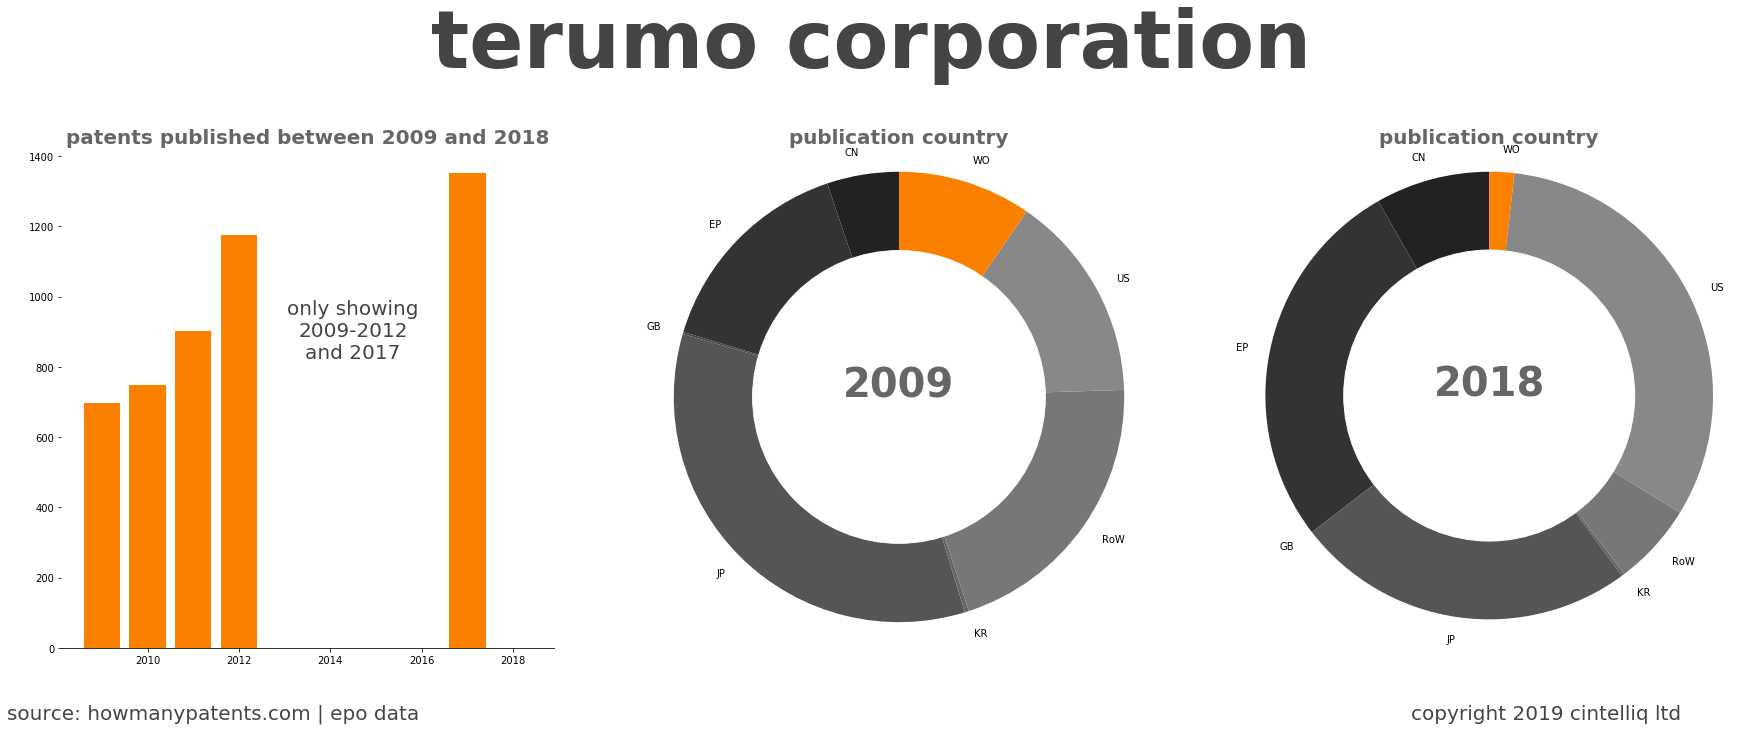 summary of patents for Terumo Corporation